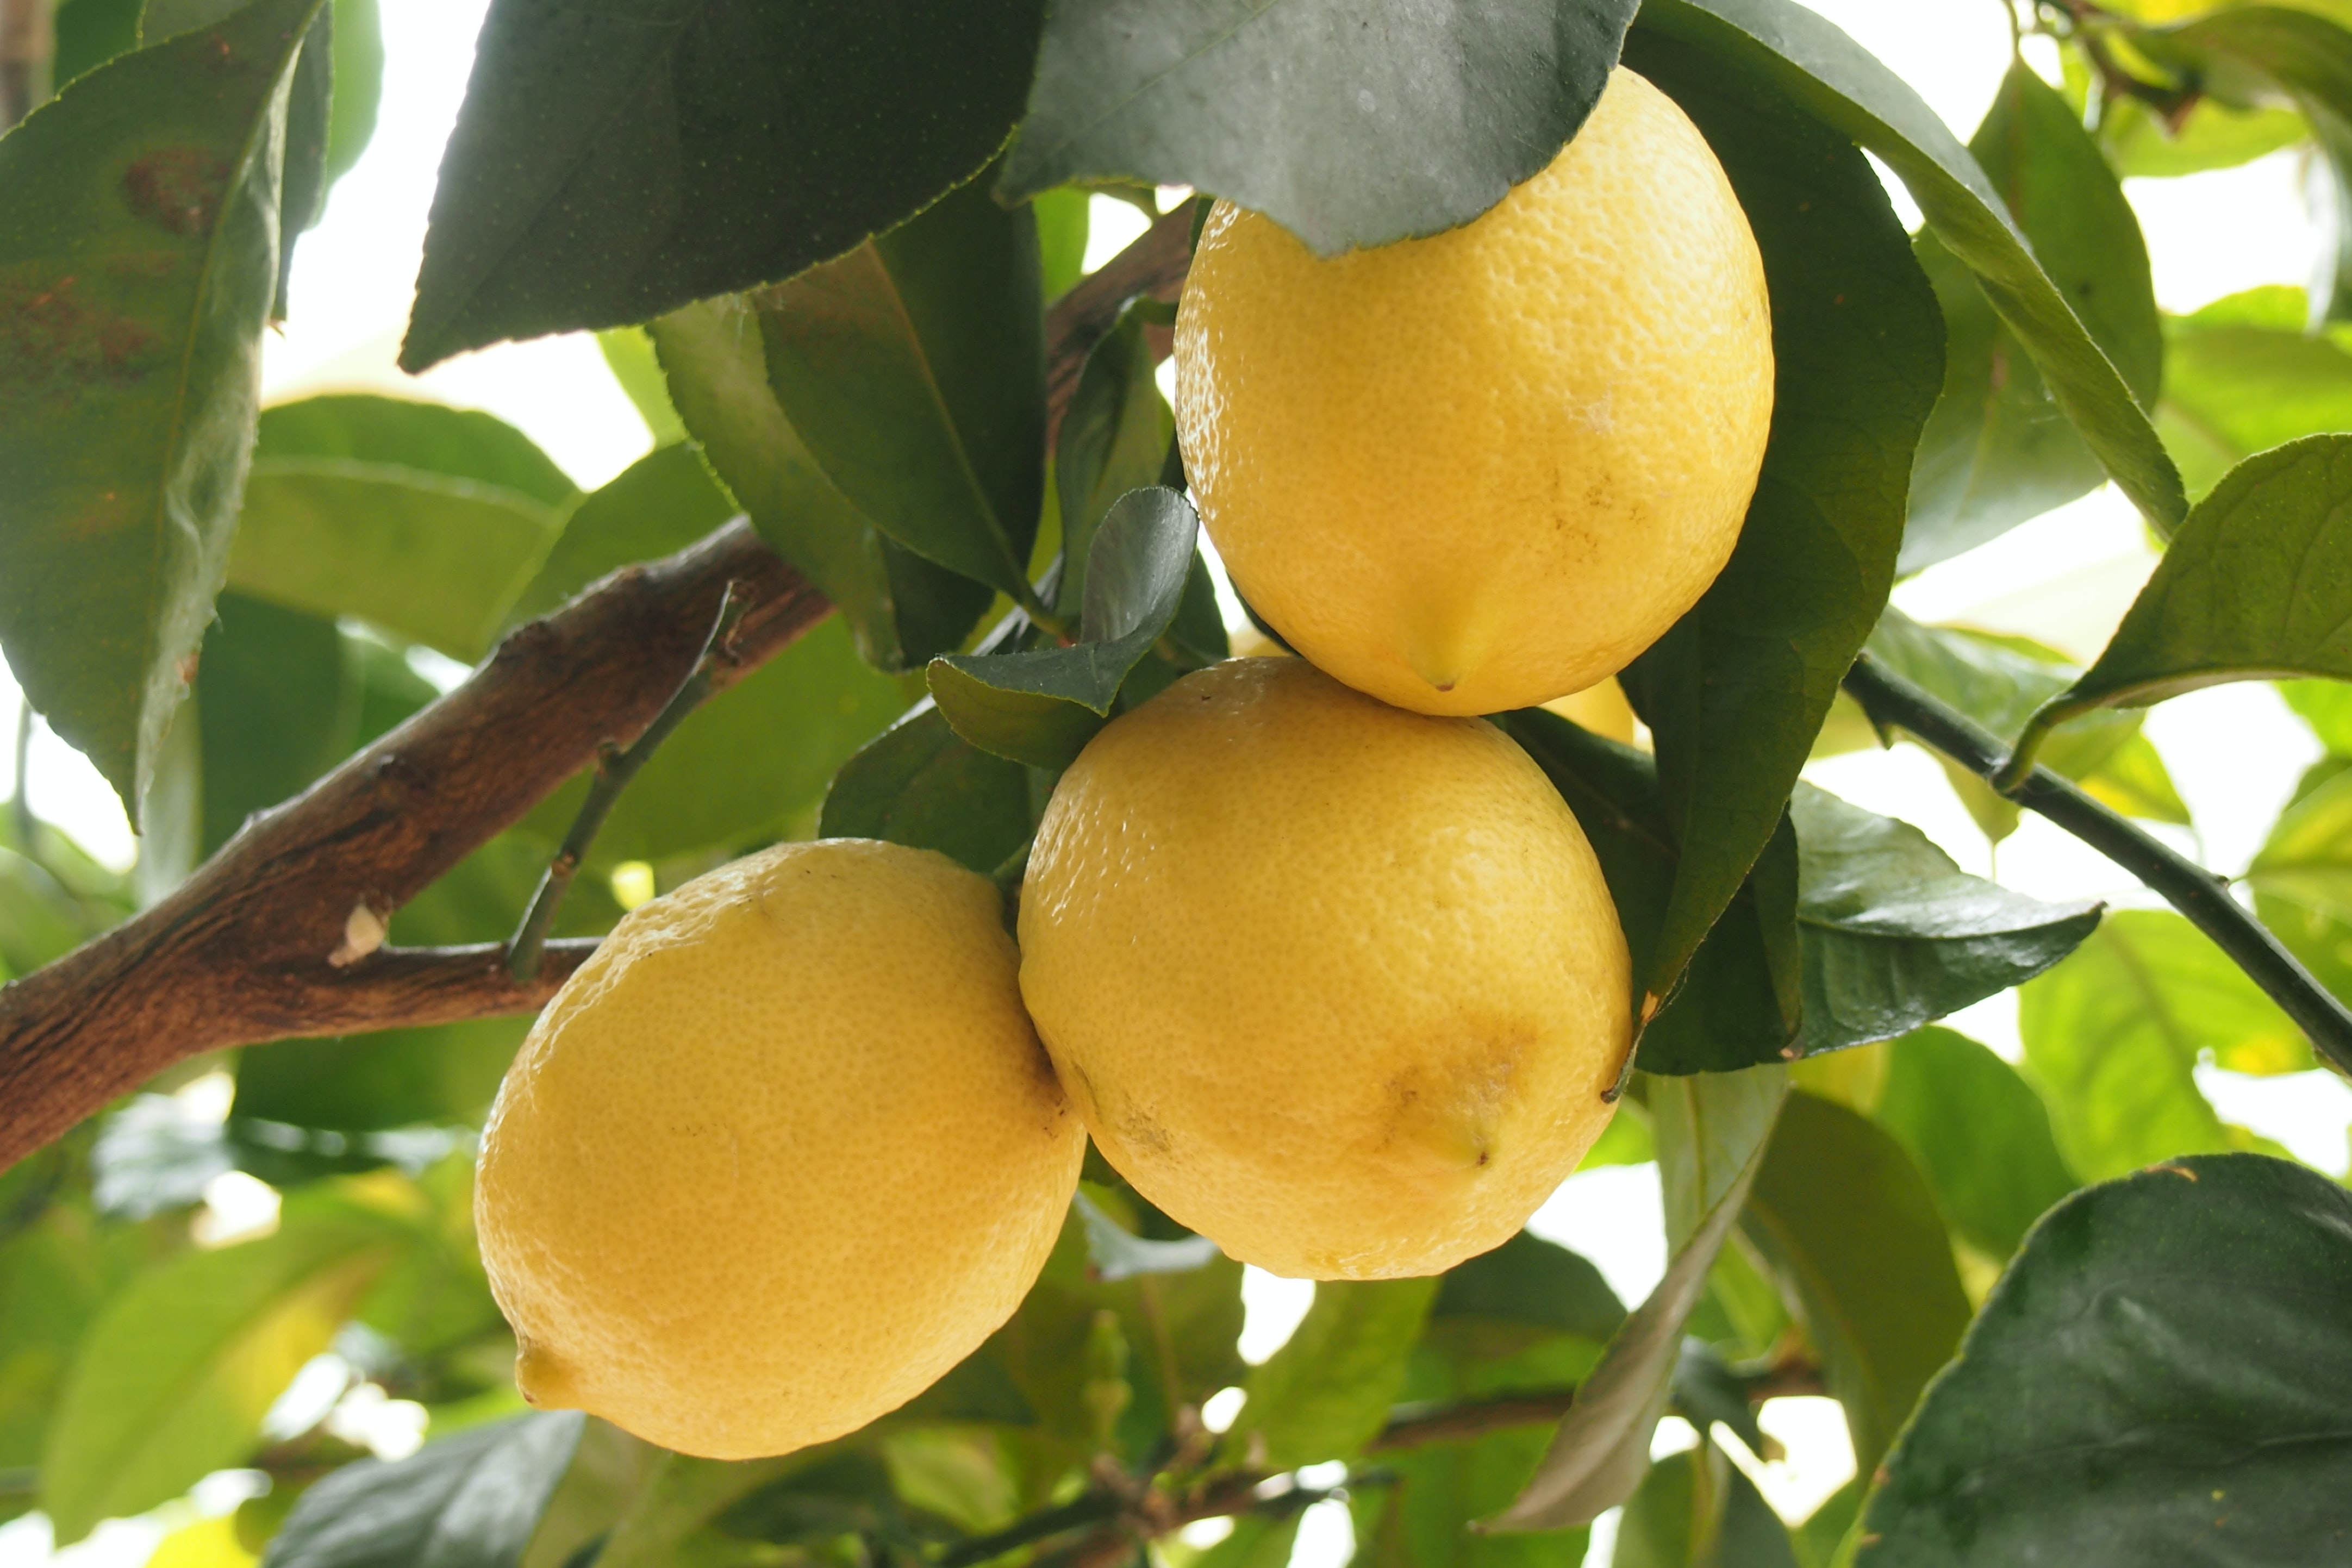 Lemons growing in a tree, a close-up photo.